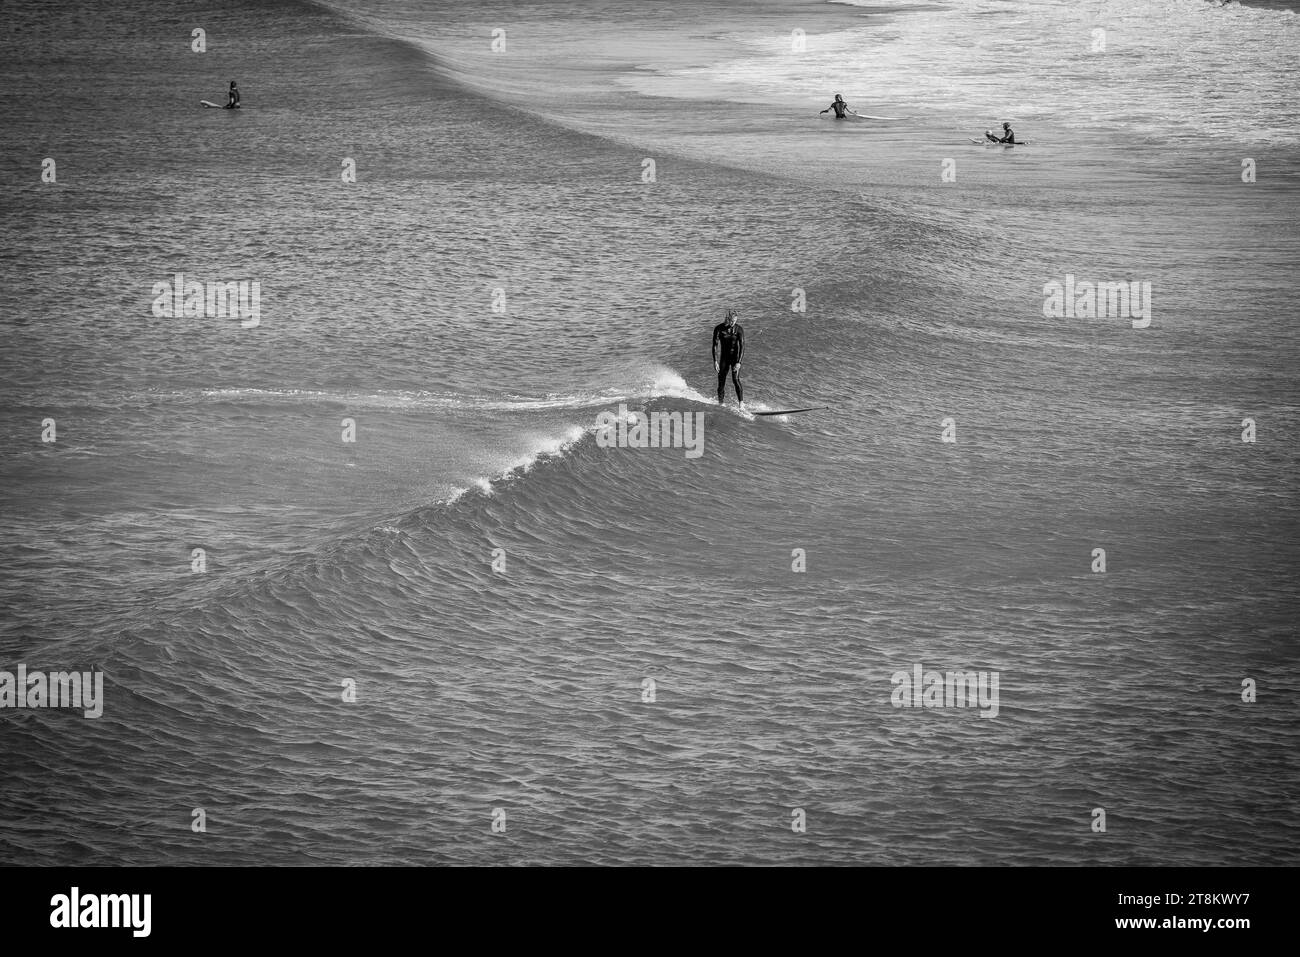 A surfer stands upright on a small wave at Maroubra Beach. Stock Photo